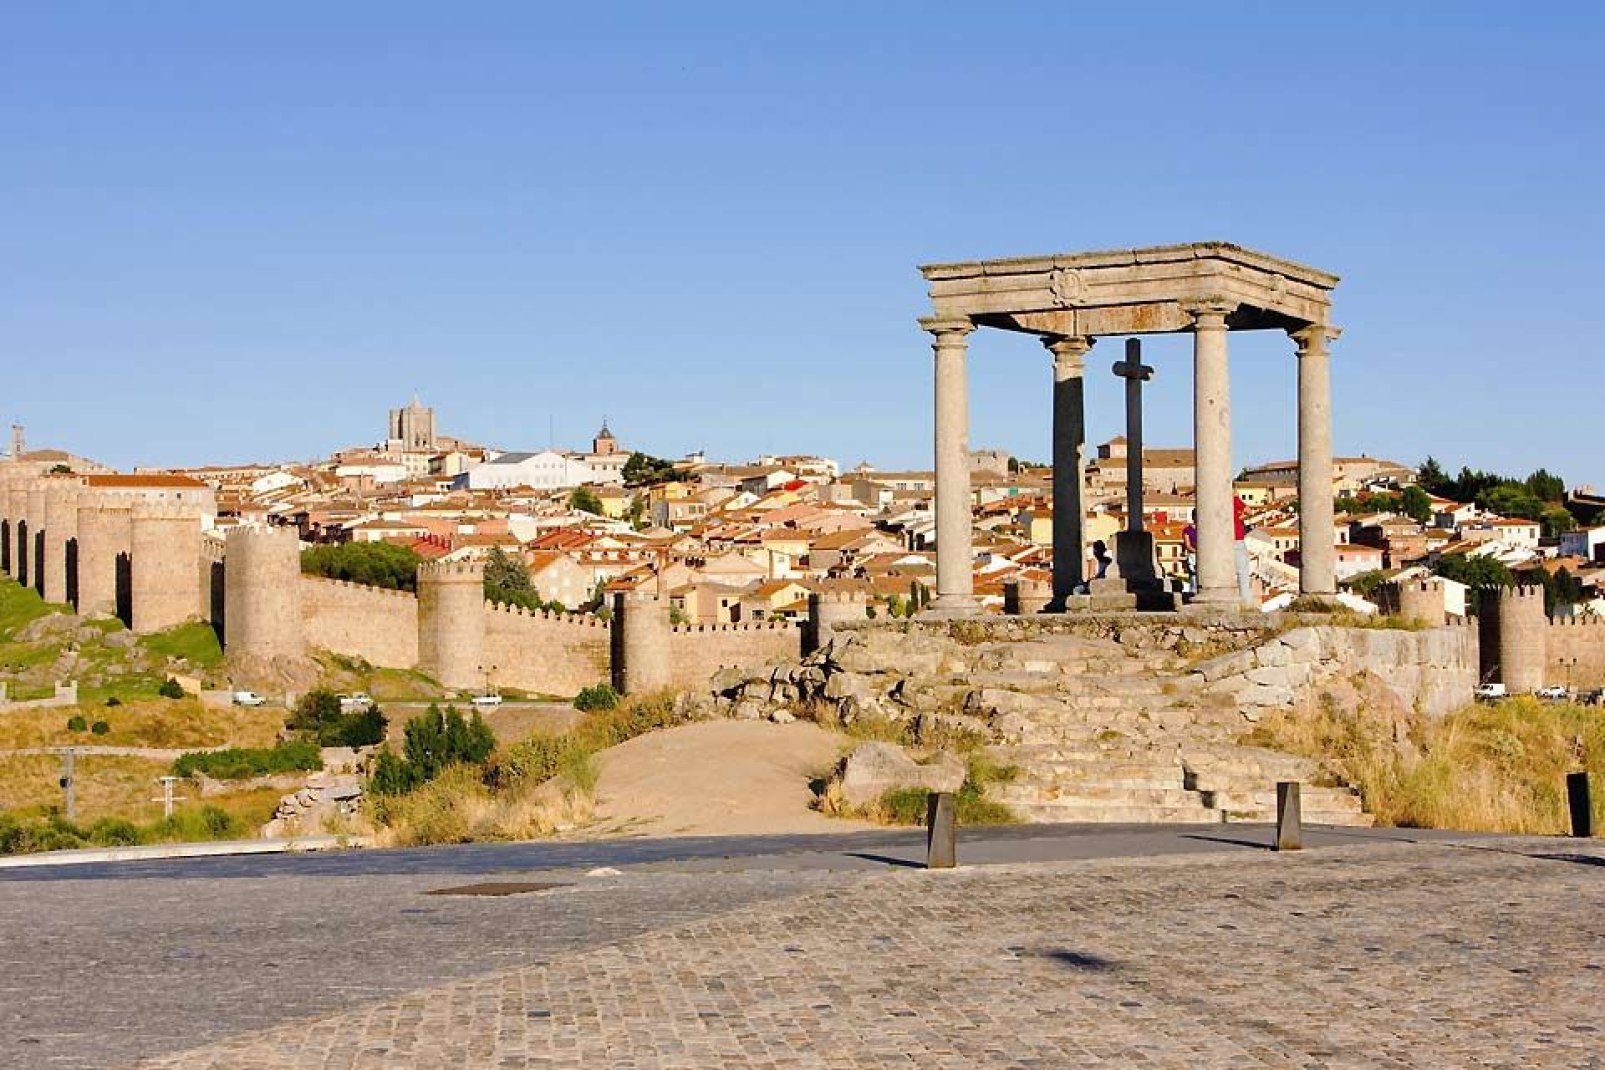 Avila is located at an altitude of 1182 metres above sea level.